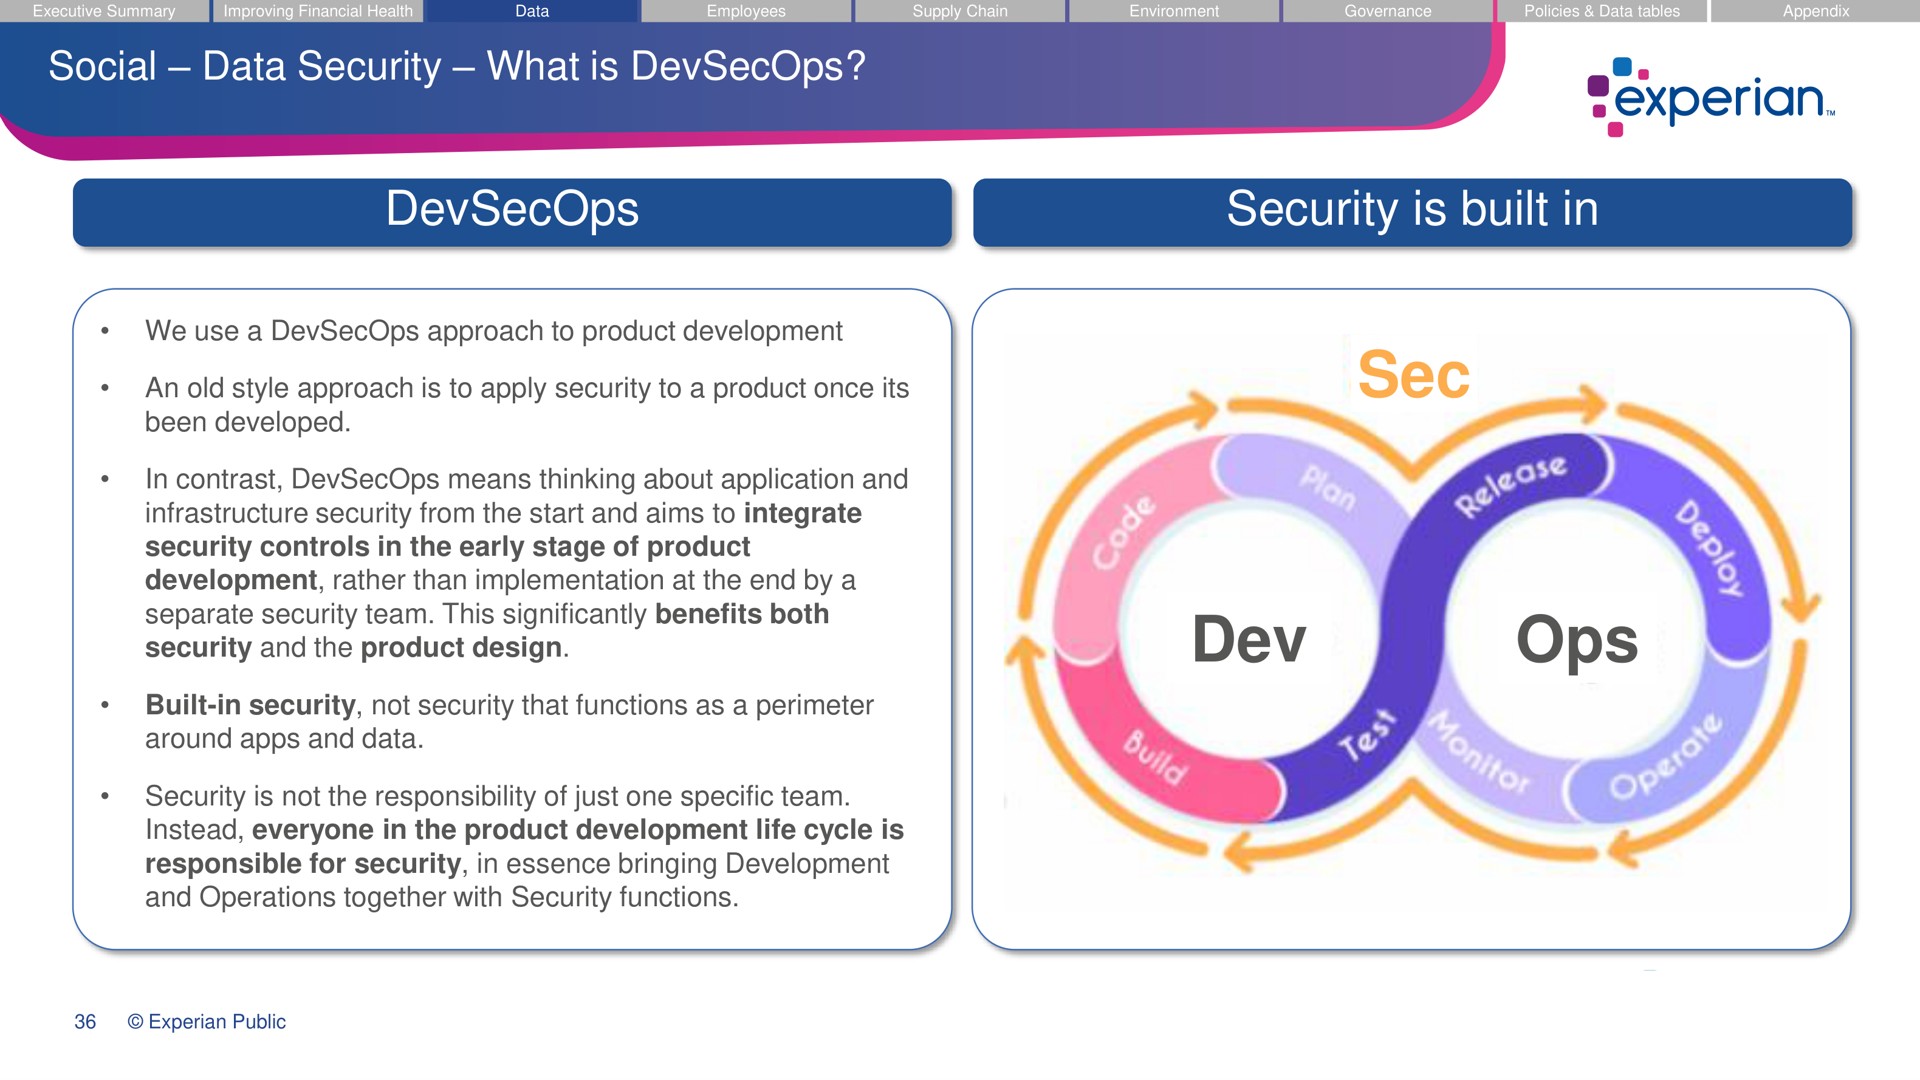 social data security what is security is built in we use a approach to product development an old style approach is to apply security to a product once its been developed in contrast means thinking about application and infrastructure security from the start and aims to integrate security controls in the early stage of product development rather than implementation at the end by a separate security team this significantly benefits both security and the product design built in security not security that functions as a perimeter around and data security is not the responsibility of just one specific team instead everyone in the product development life cycle is responsible for security in essence bringing development and operations together with security functions sec dev i | Experian